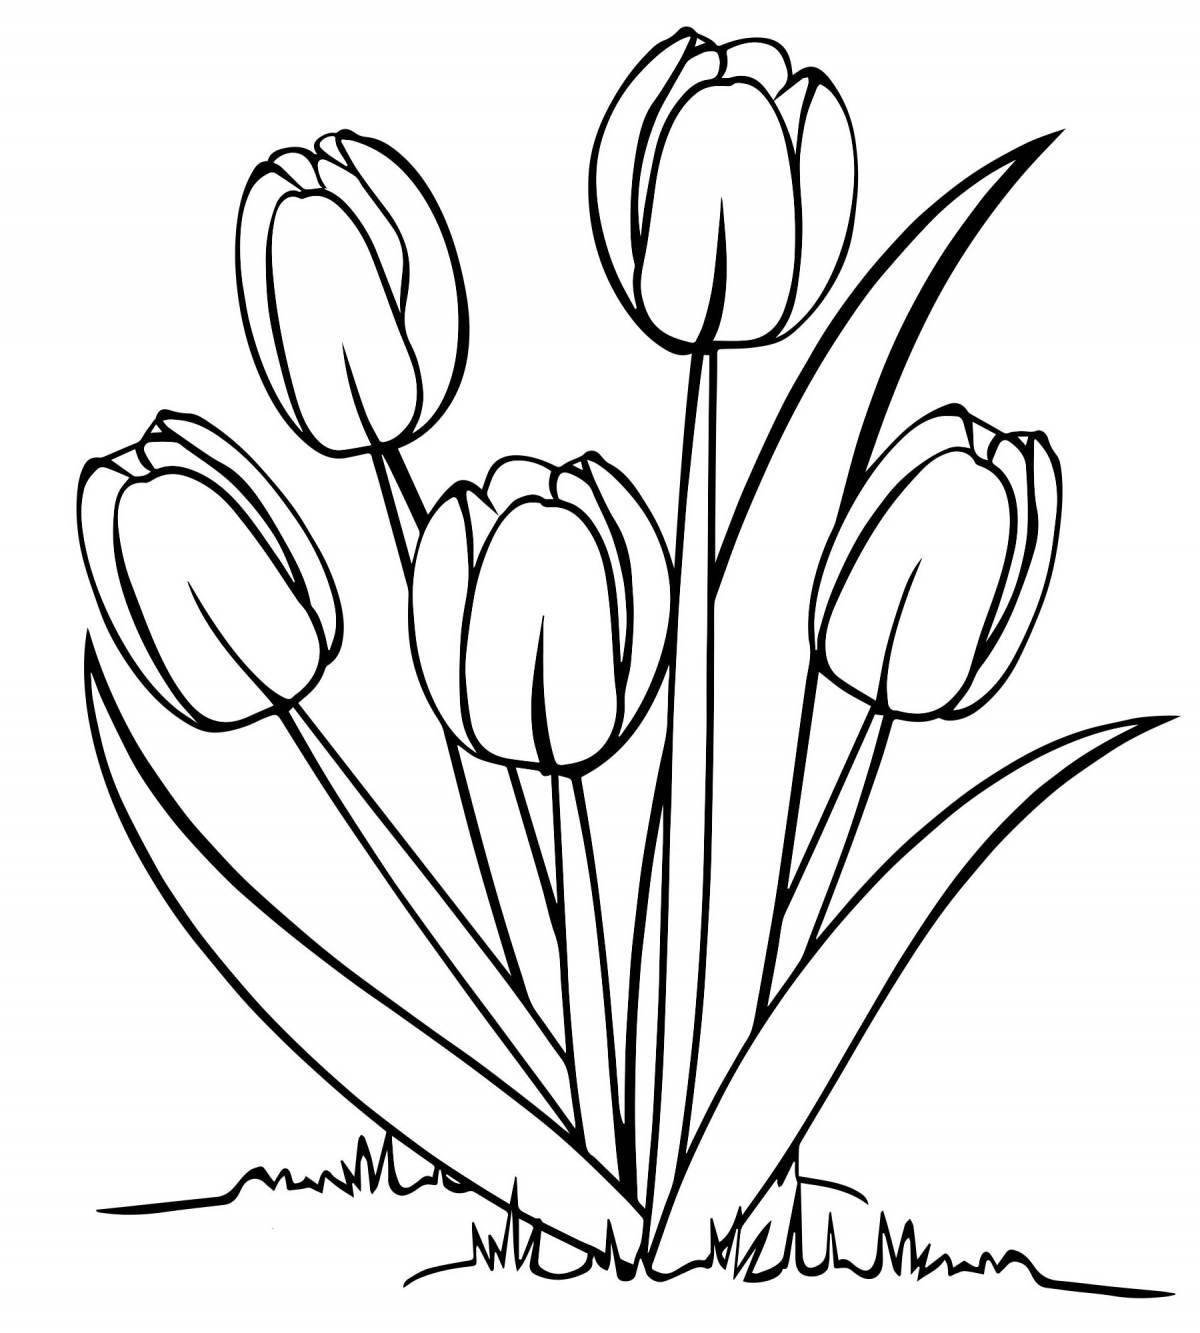 Coloring page inviting spring tulips